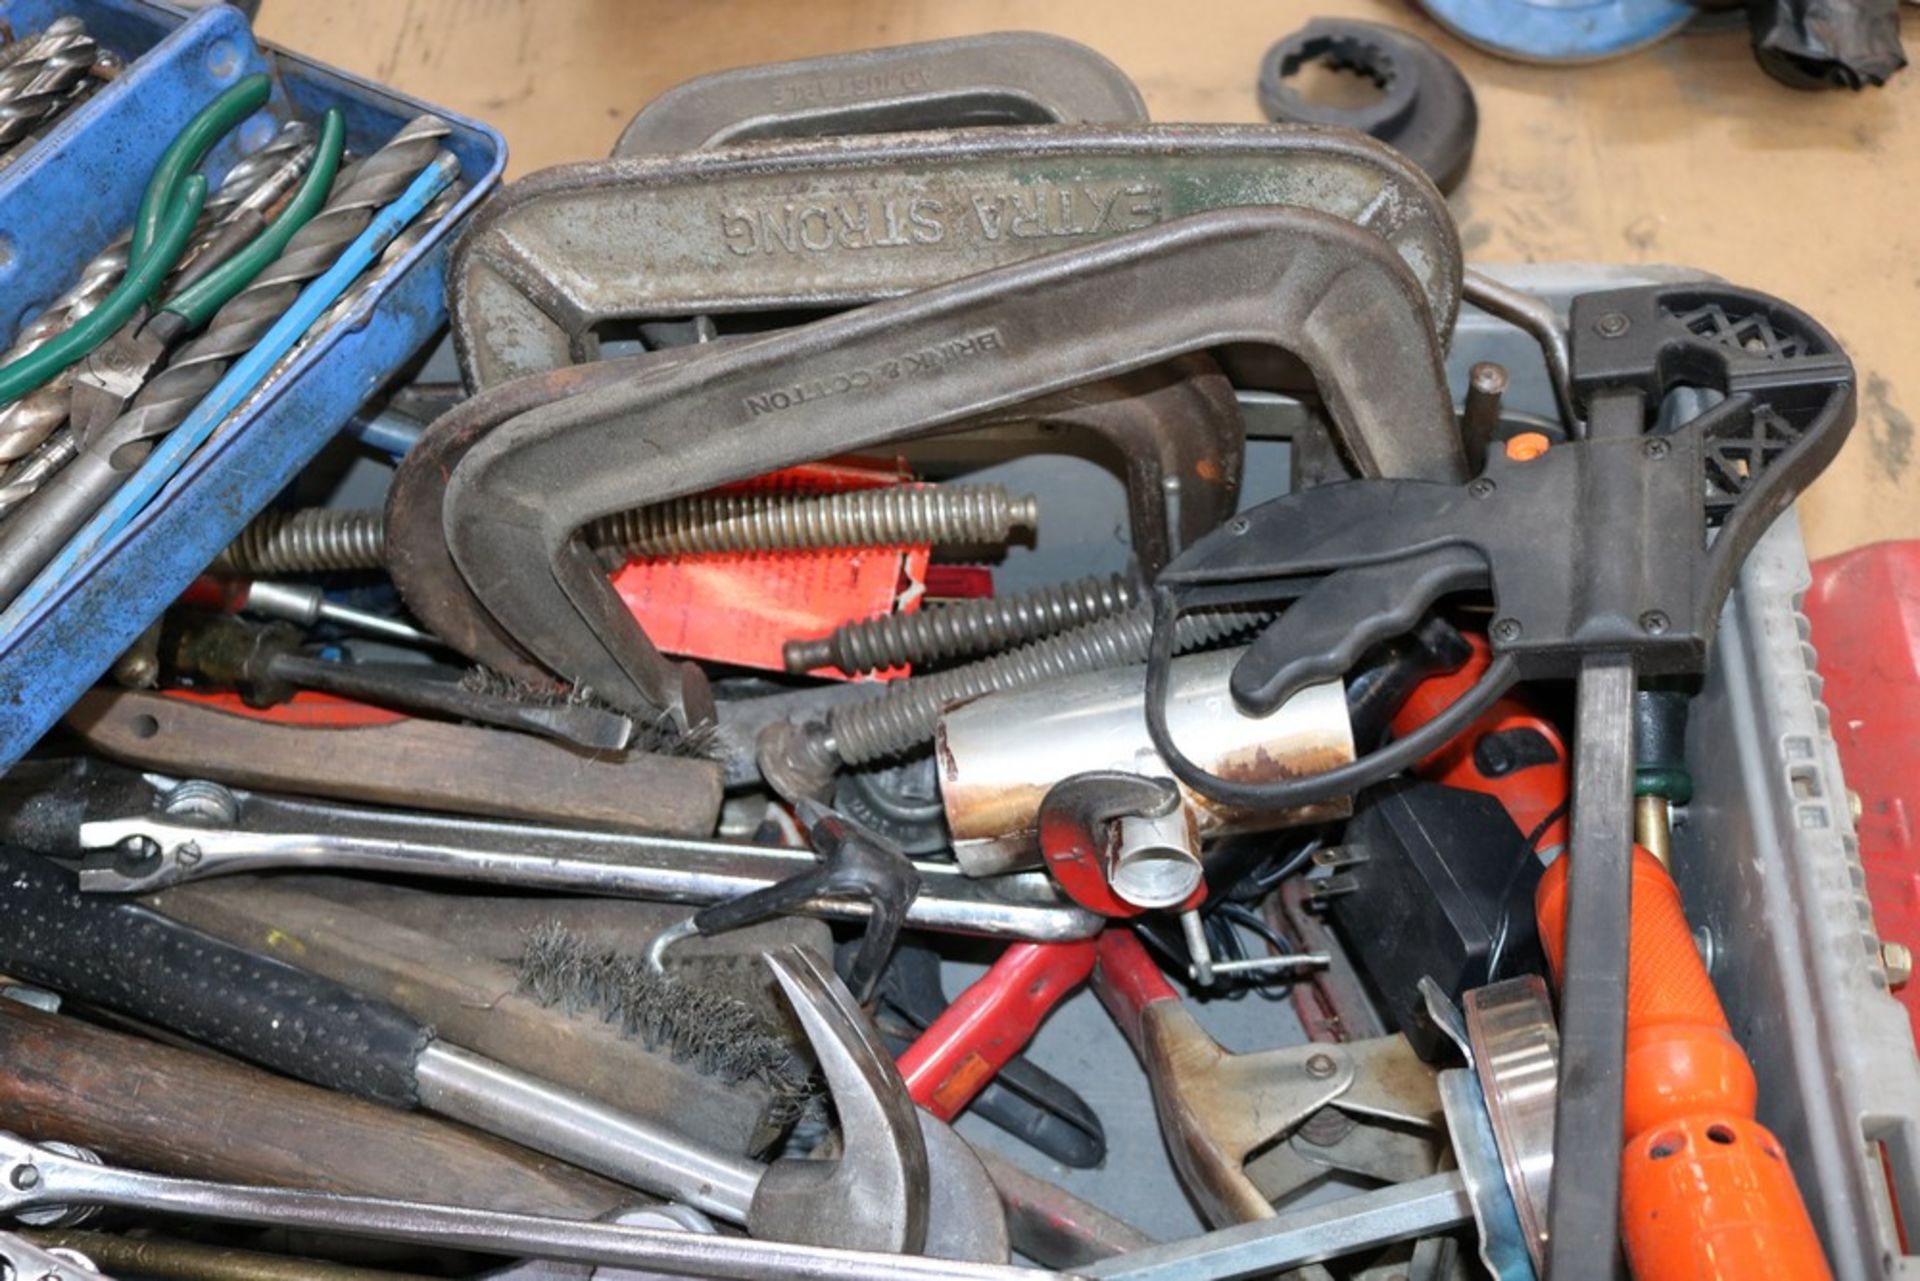 Box of Handtools, C Clamps, Crescent Wrenches, Chizels, Hammers and Others - Image 3 of 4